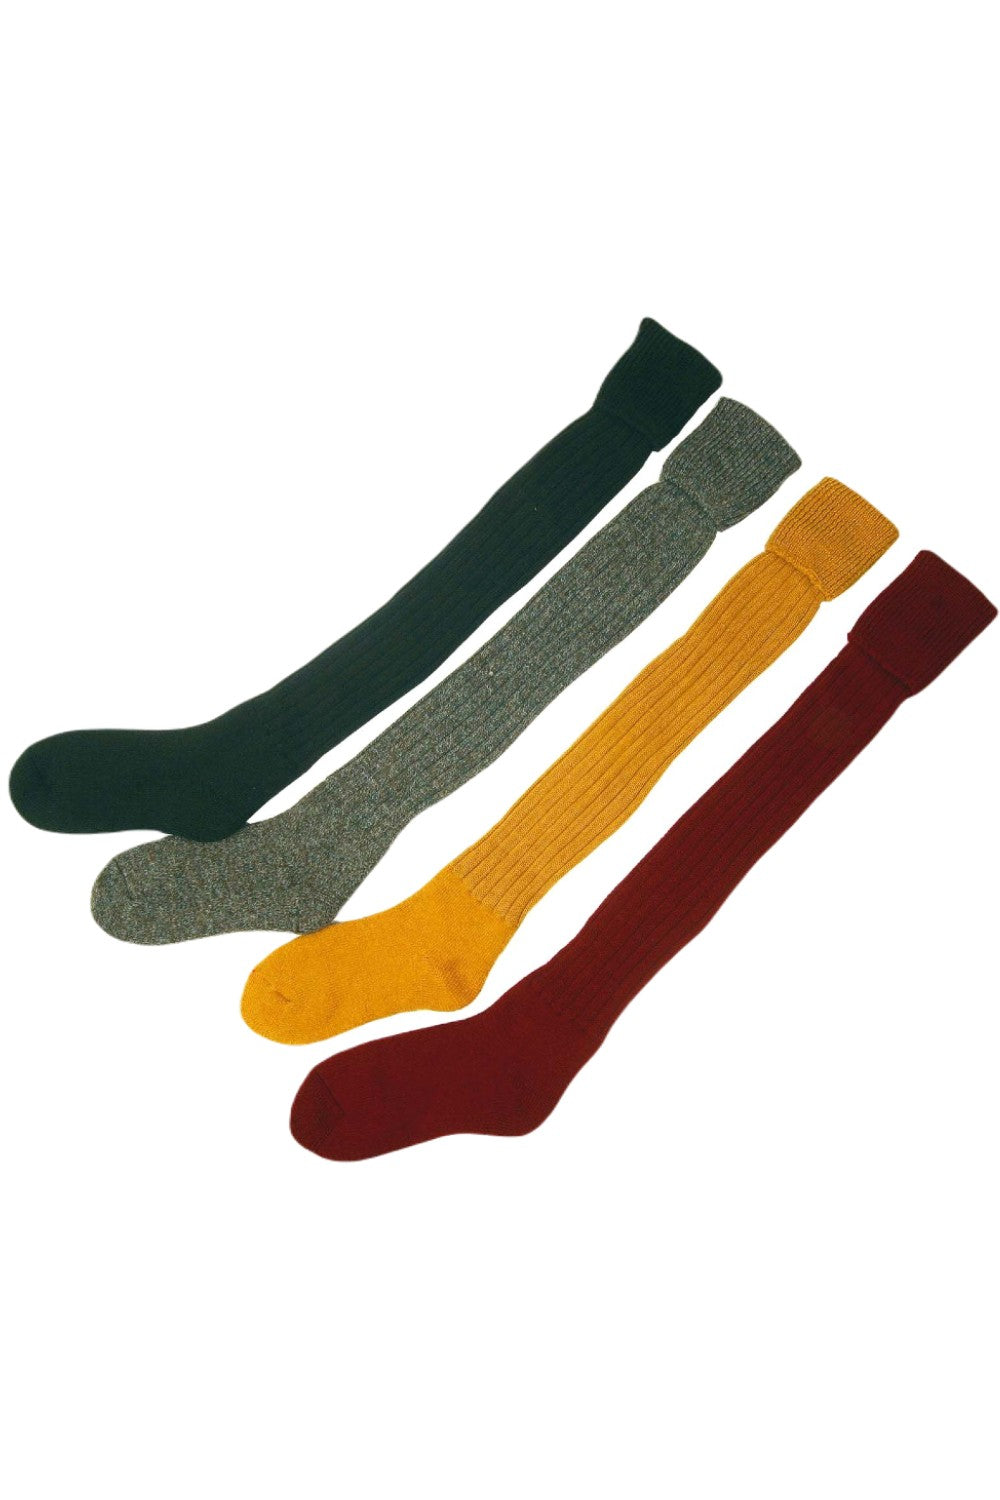 Bisley Plain Stockings In Olive, Tweed, Yellow and Red